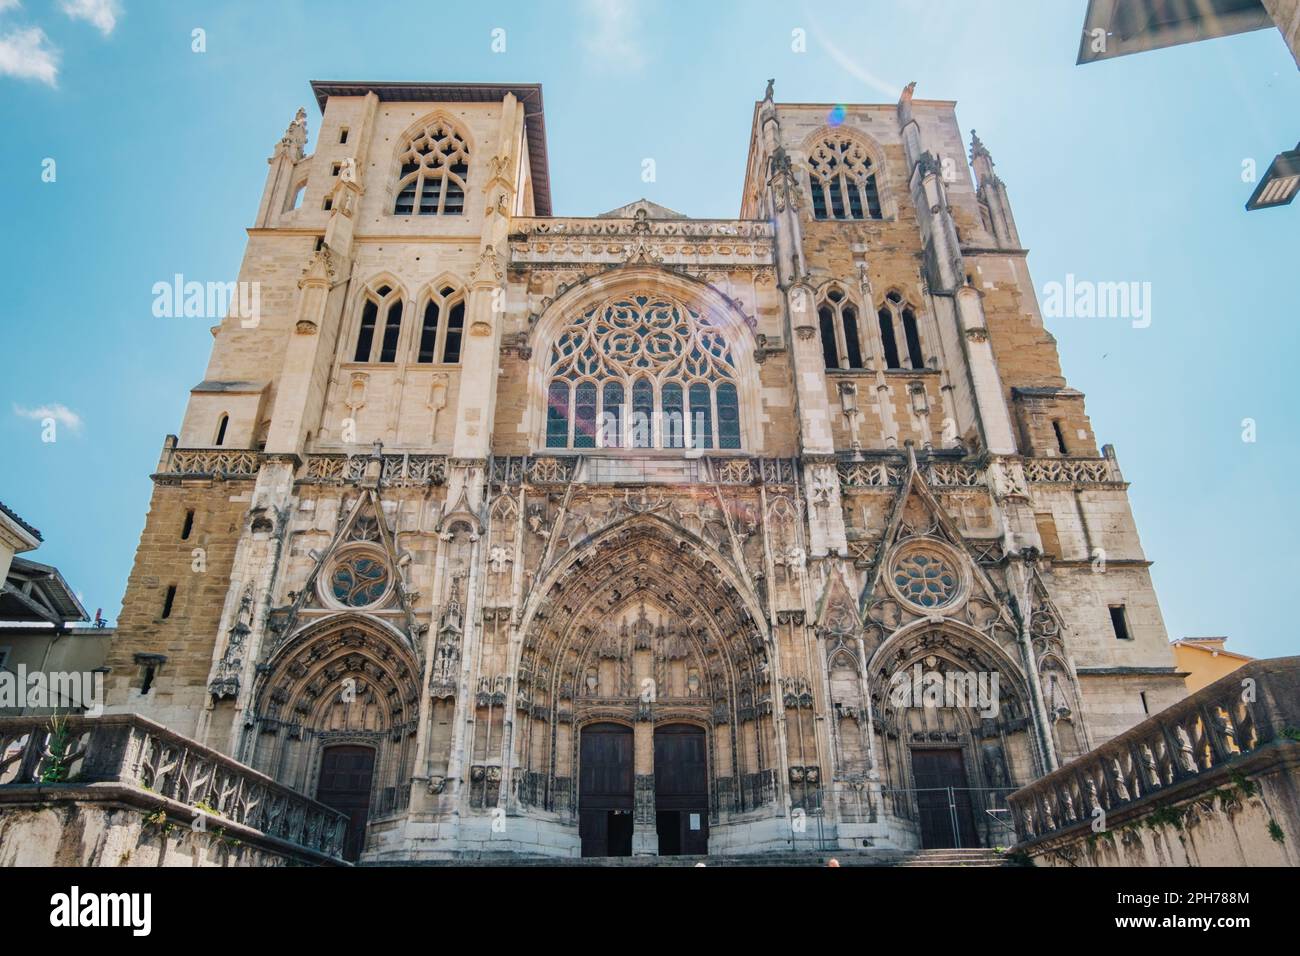 View of the facade of the Saint Maurice Cathedral a medieval church in Vienne Isere France Stock Photo